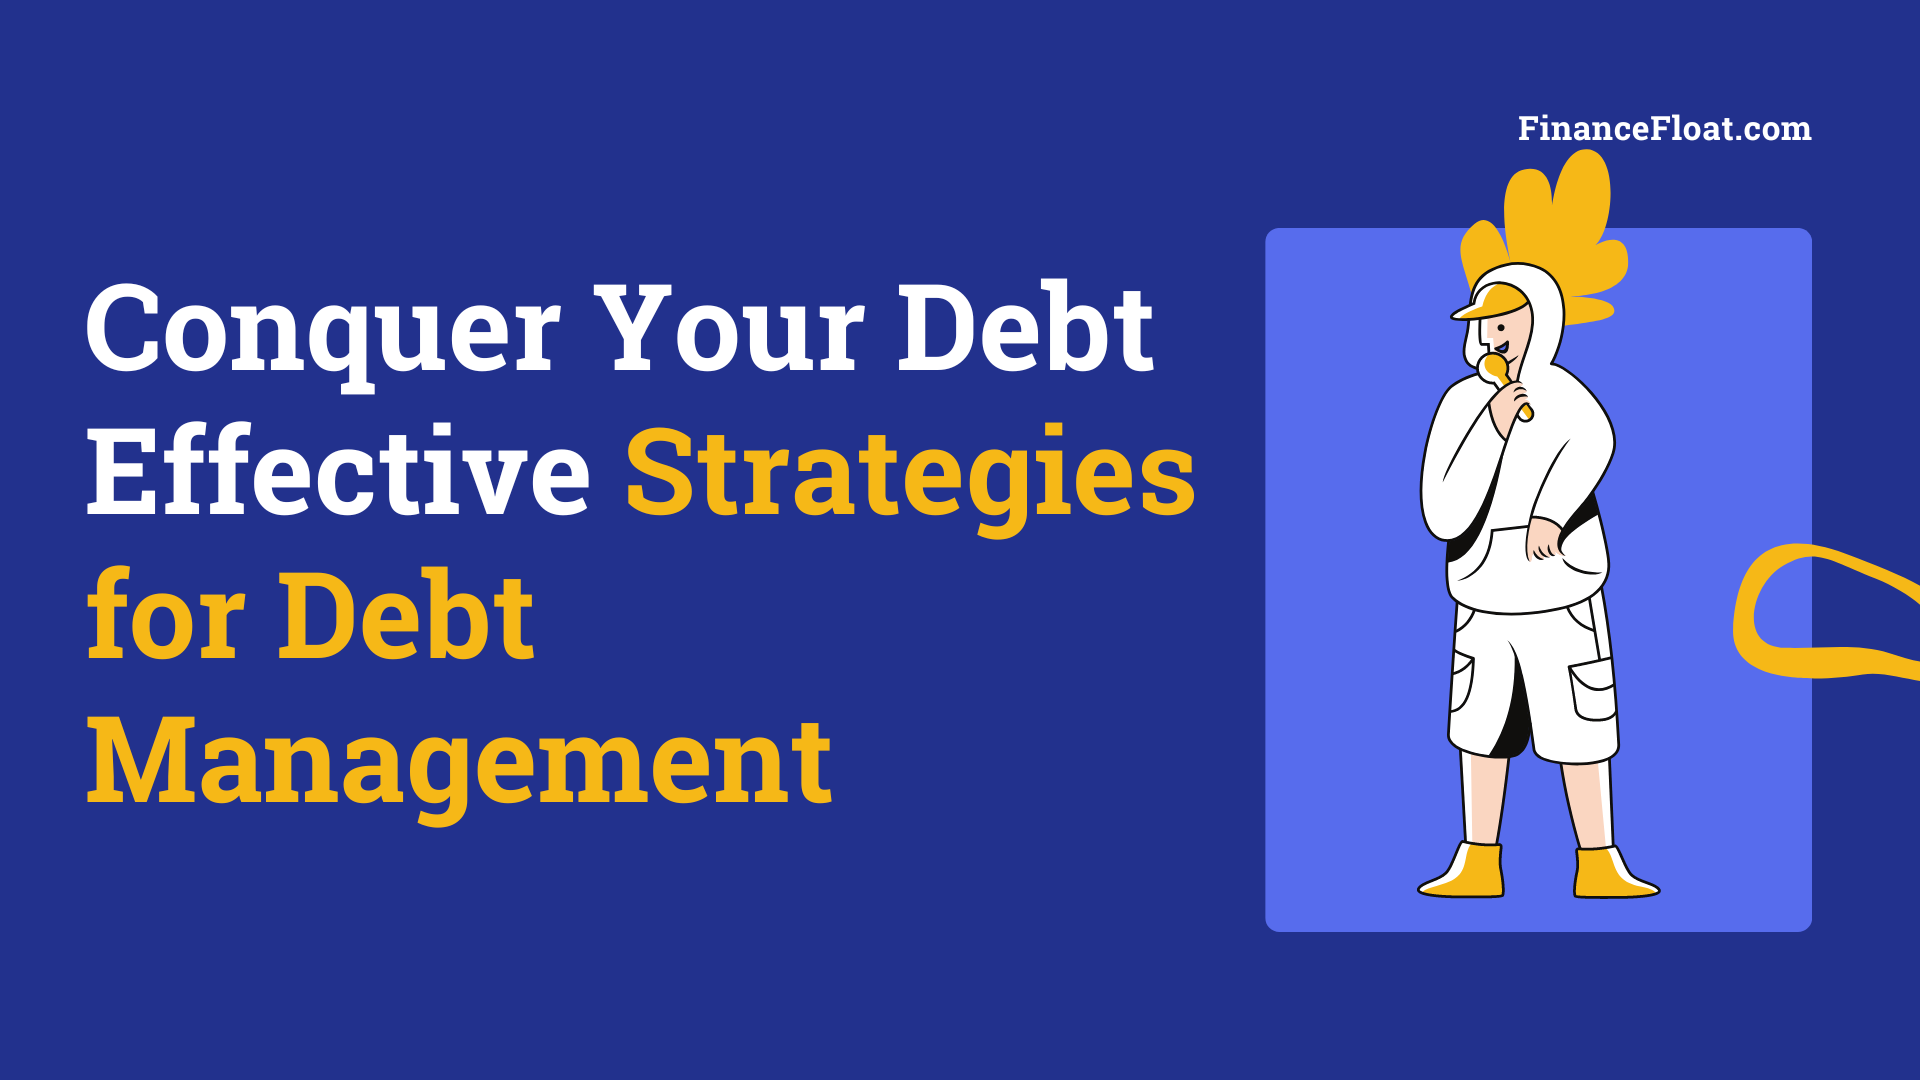 Conquer Your Debt Effective Strategies for Debt Management